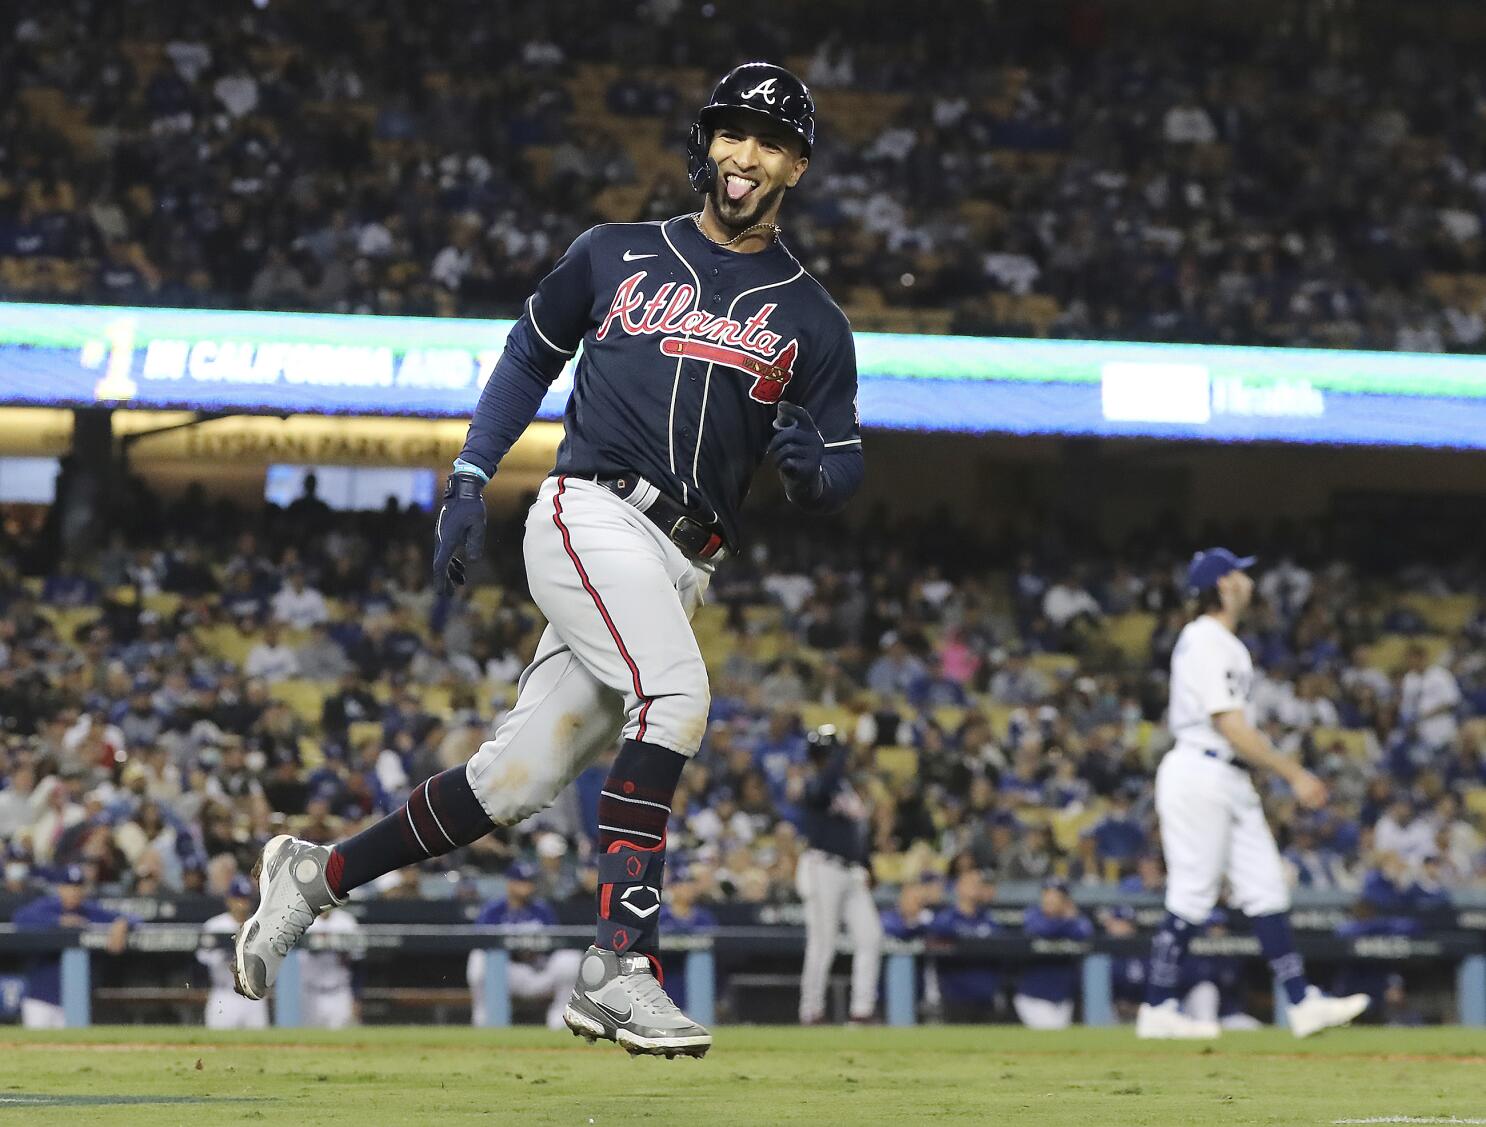 Eddie Rosario leads Braves to first World Series since 1999